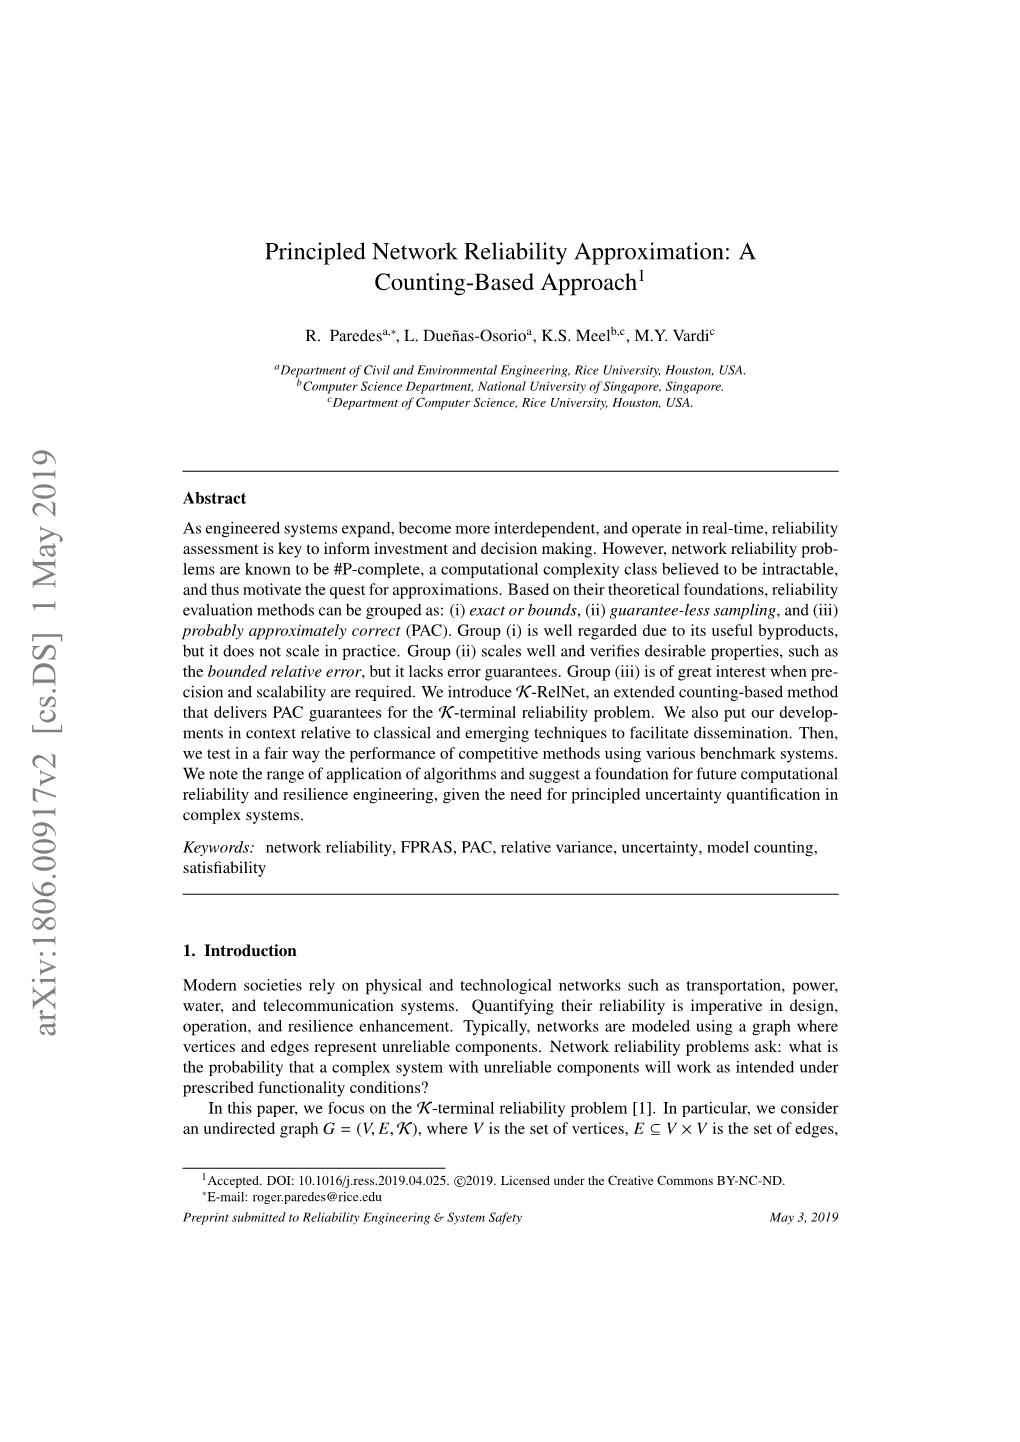 Principled Network Reliability Approximation: a Counting-Based Approach1